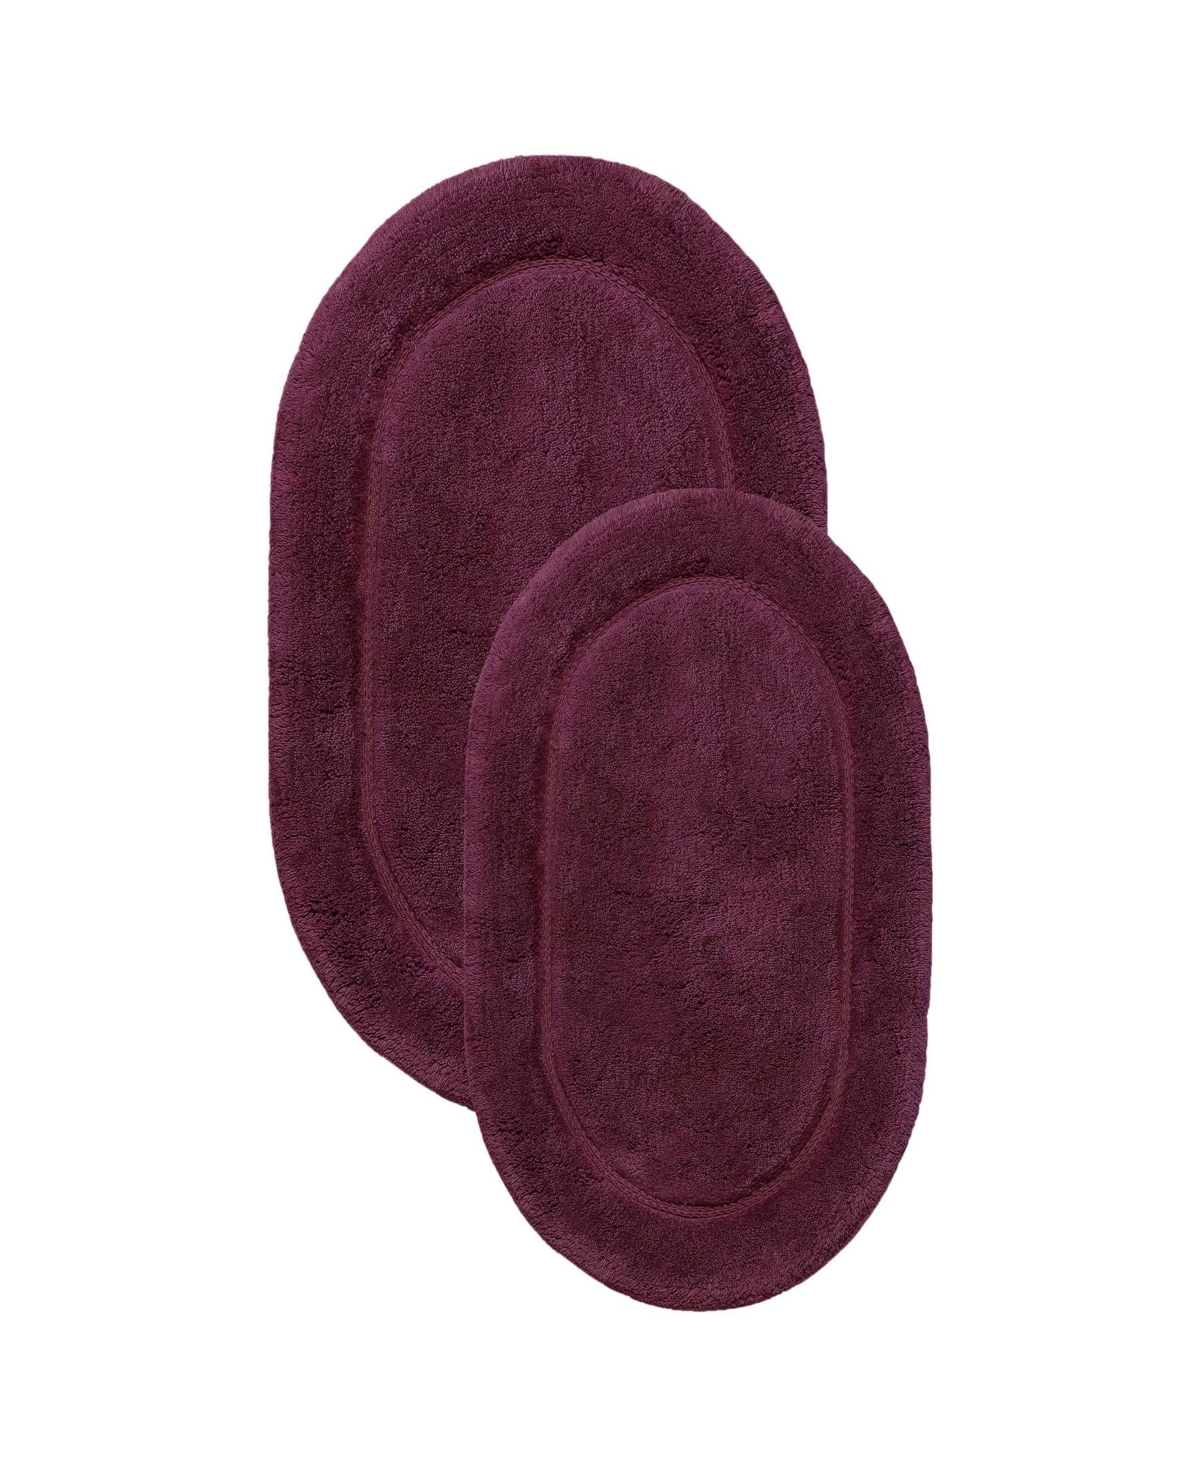 Superior Non-slip Oval 2pc Absorbent Bath Rug Set In Plum